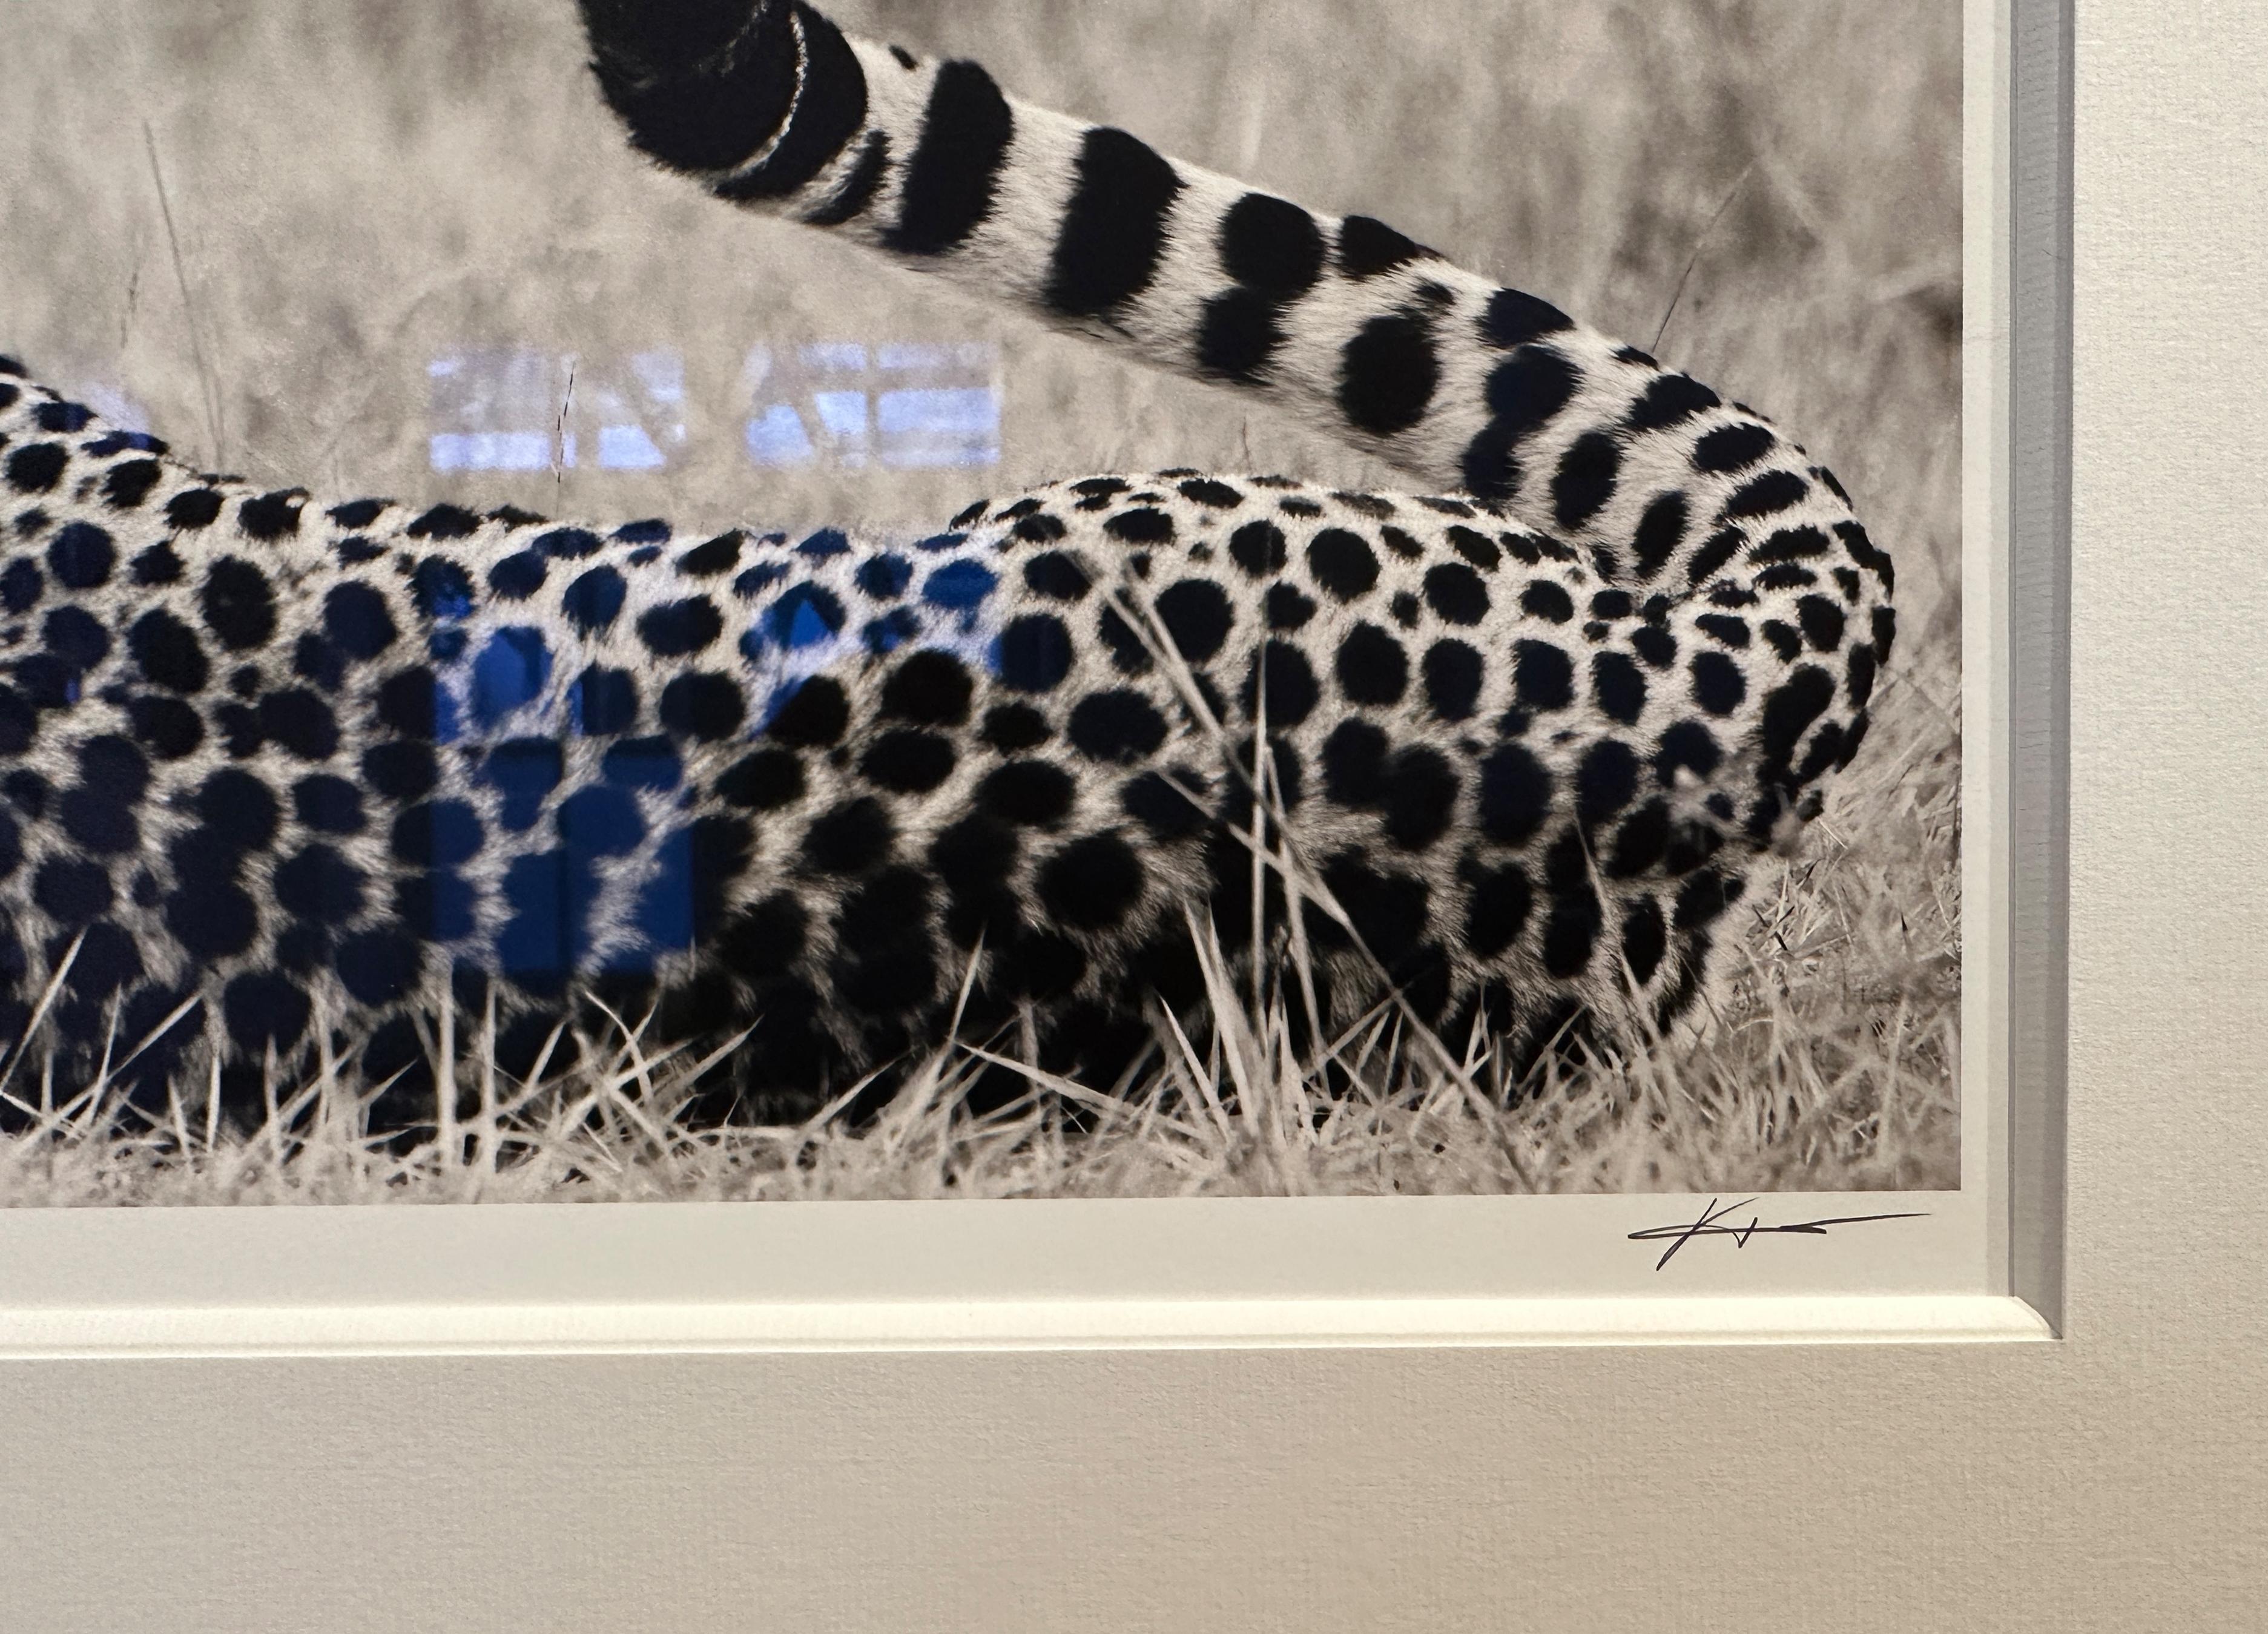 Edition No. 10/12
image size 37,6 x 24,6 cm
signed and numbered
Framed with mat and anti-reflex glass

A beautiful portrait of a cheetah lying in the savannah

Joachim Schmeisser is represented by leading Galleries worldwide. His photographs are